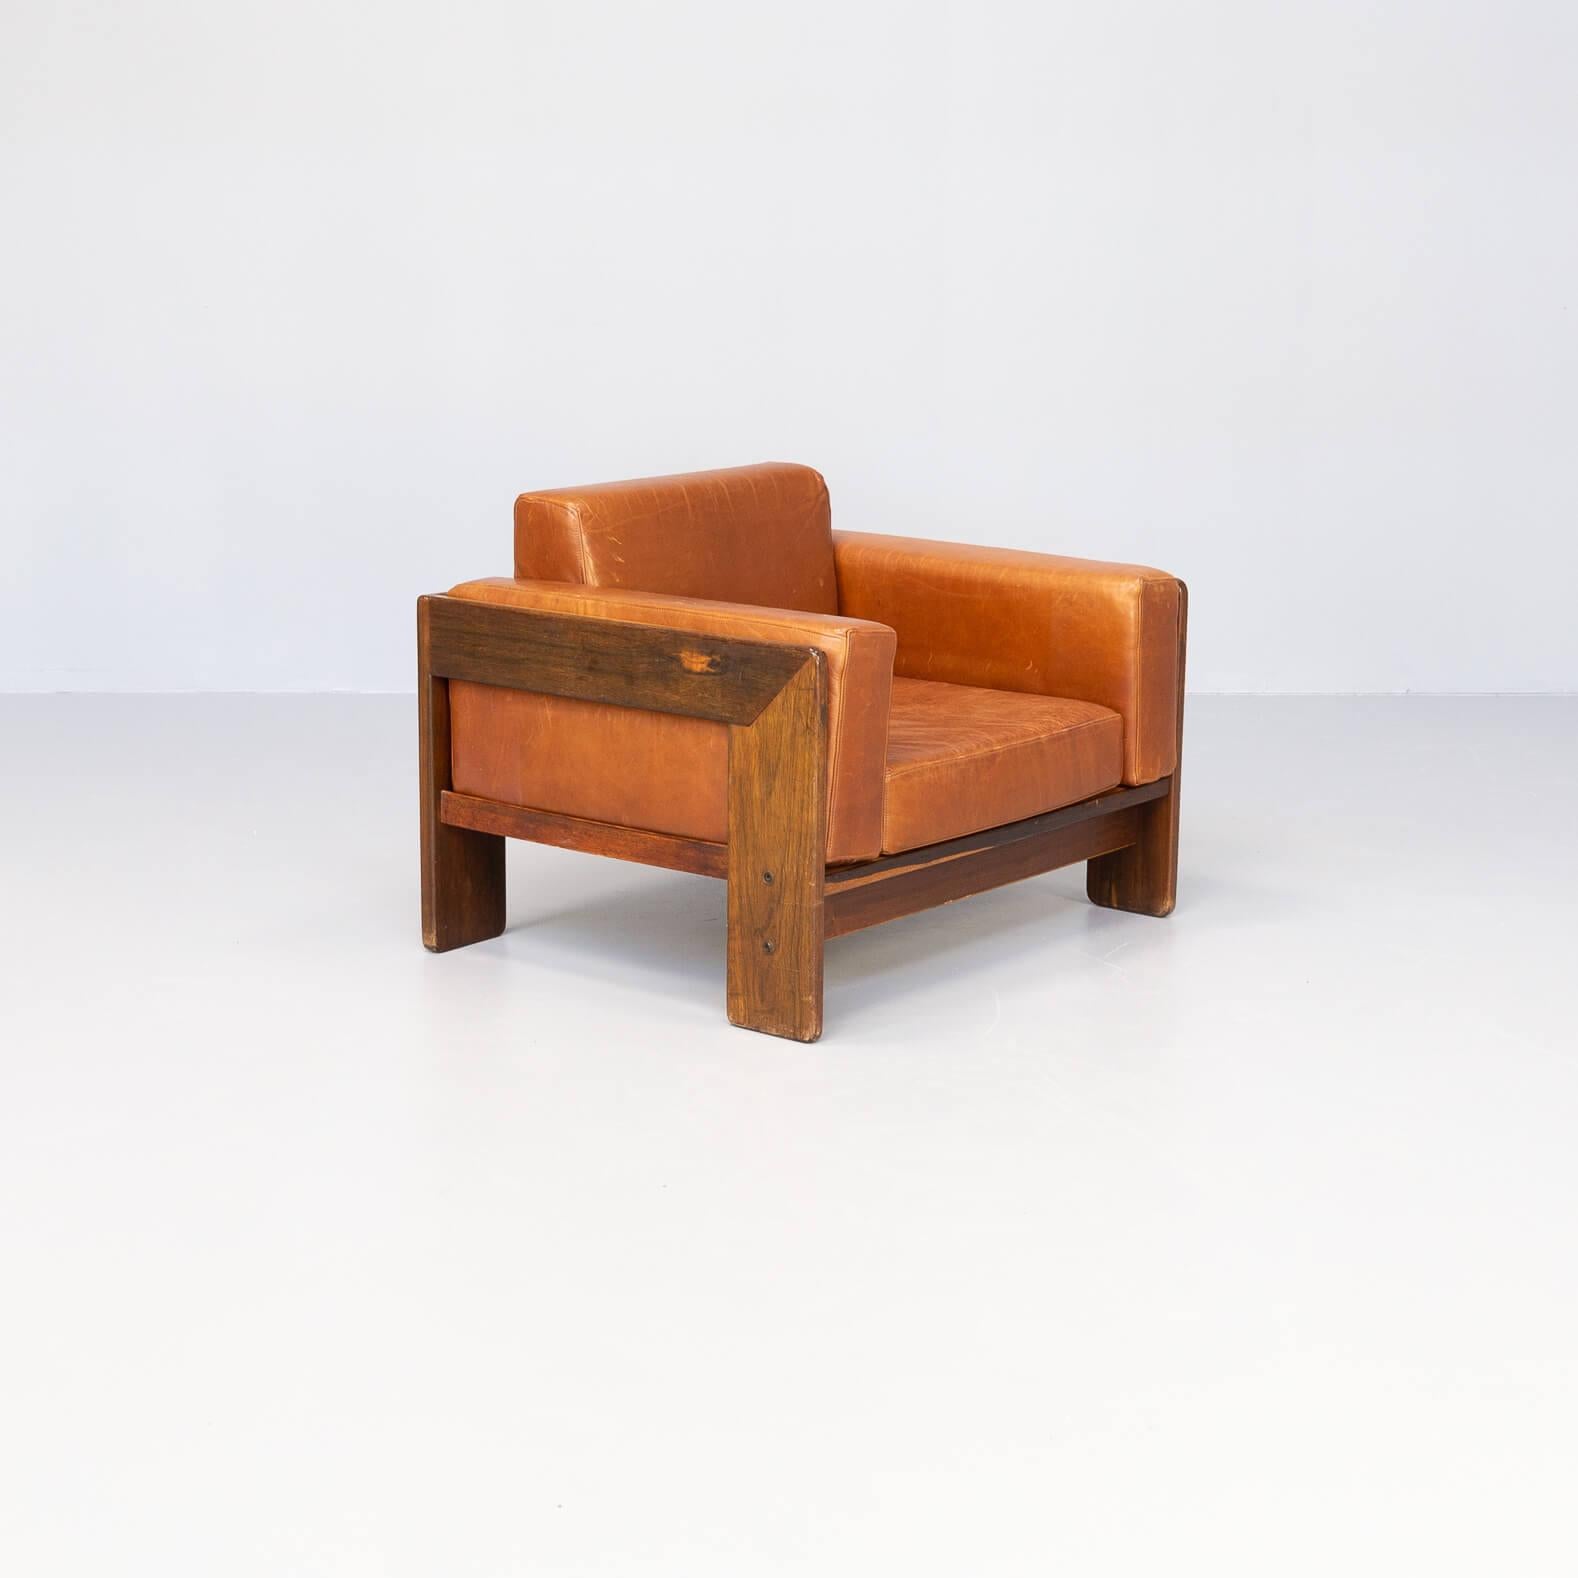 60s Tobia Scarpa ‘Bastiano’ Sofa, Fauteuil & Sidetable Set for Knoll For Sale 8